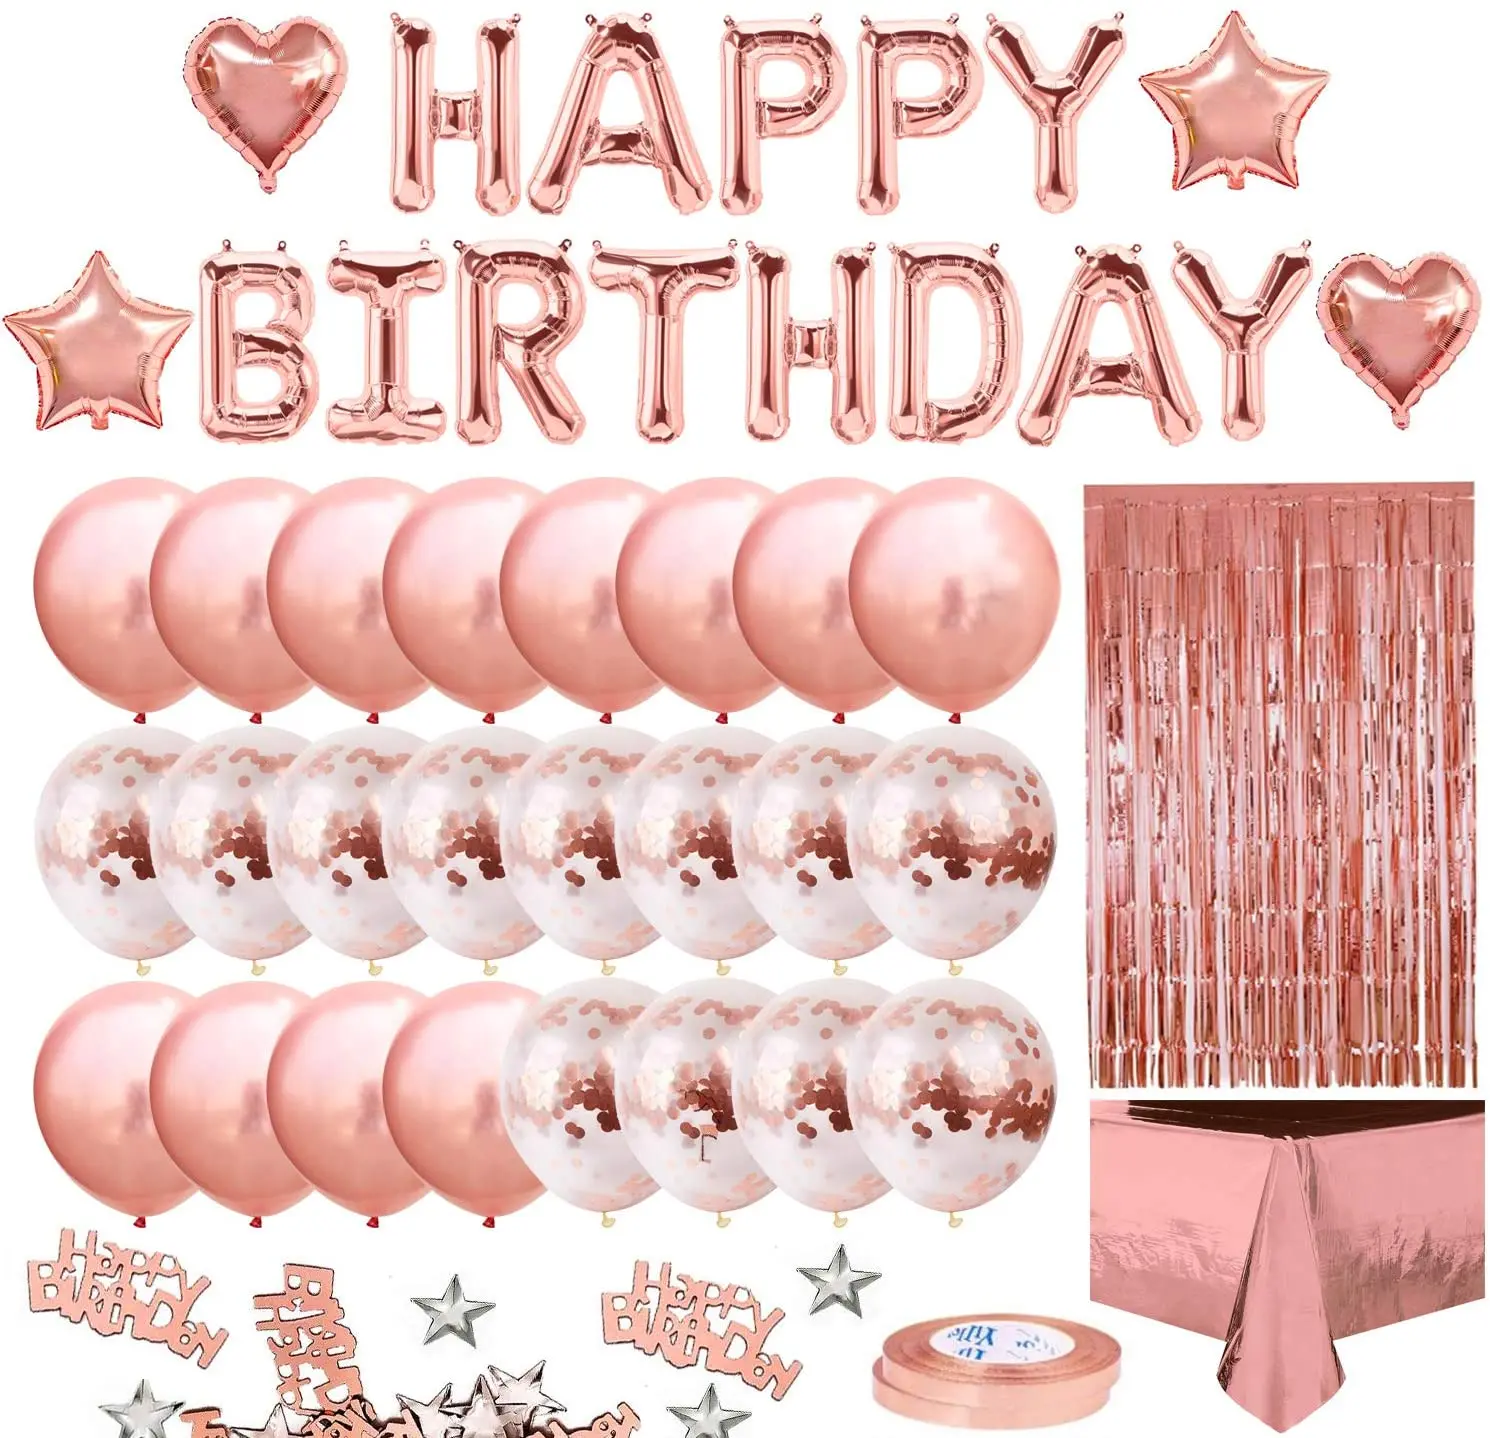 Details about   Kids Party Favors 1set Happy Birthday Letter Banner Rose Gold Confetti Balloons 